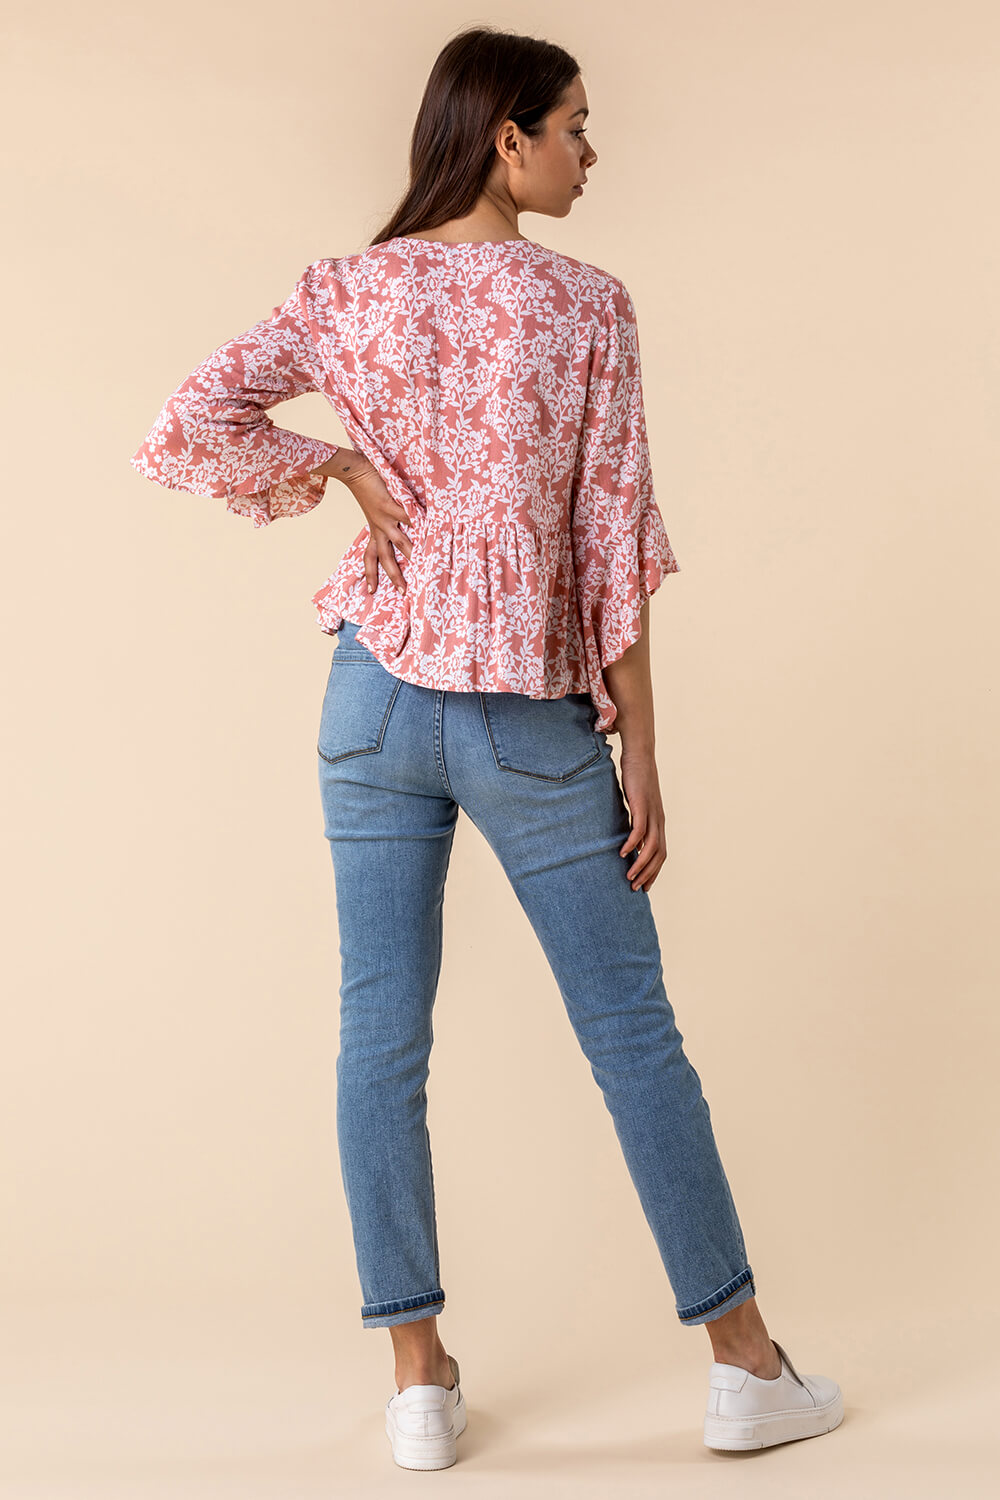 PINK Floral Print Frill Detail Blouse, Image 2 of 4